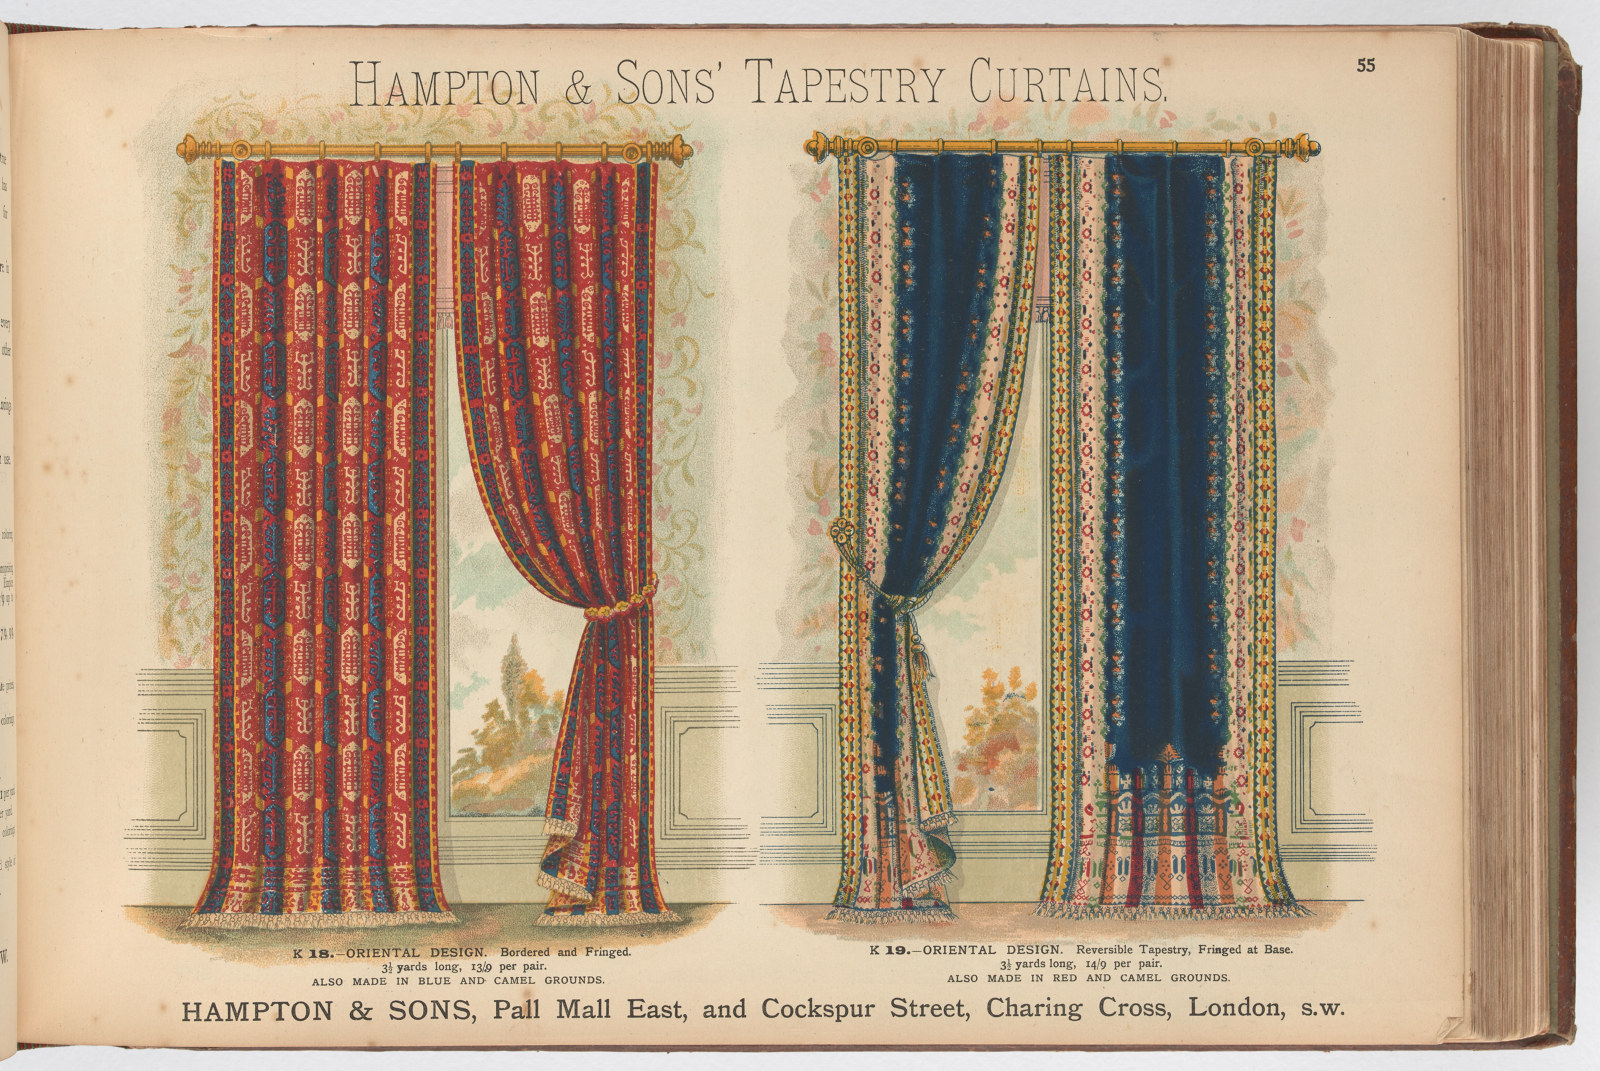 Designs for furniture and decorations for complete house furnishings : Illustrated with fifty collotype reproductions of artistic interiors, in various styles, specially designed for this work upwards of 2,000 half-tone blocks of furniture photographed from stock, and many coloured illustrations of carpets, curtains, linens, china and glass, etc. / by Hampton & Sons.